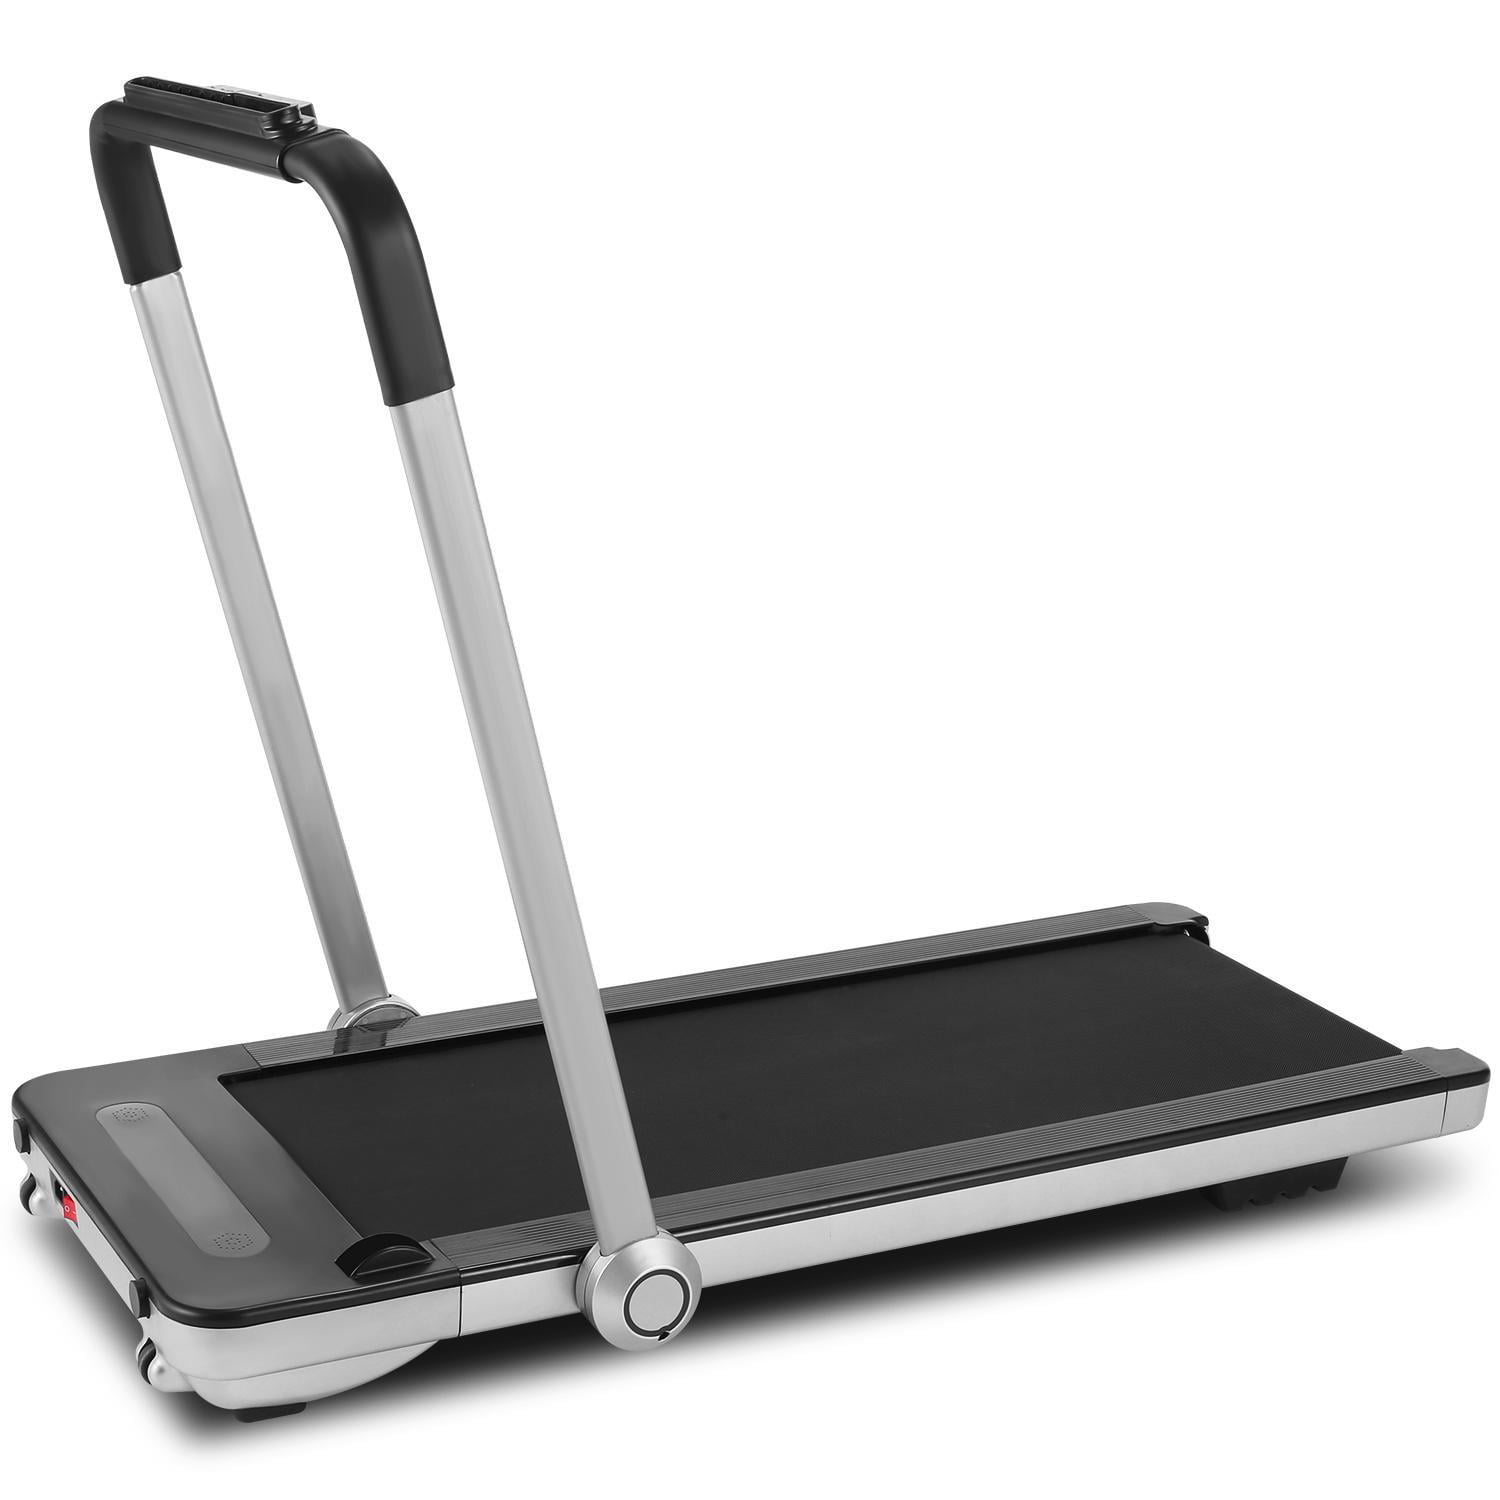 Details about   Folding Mechanical Treadmill Walking Running Jogging Fitness Machine Home Gym US 